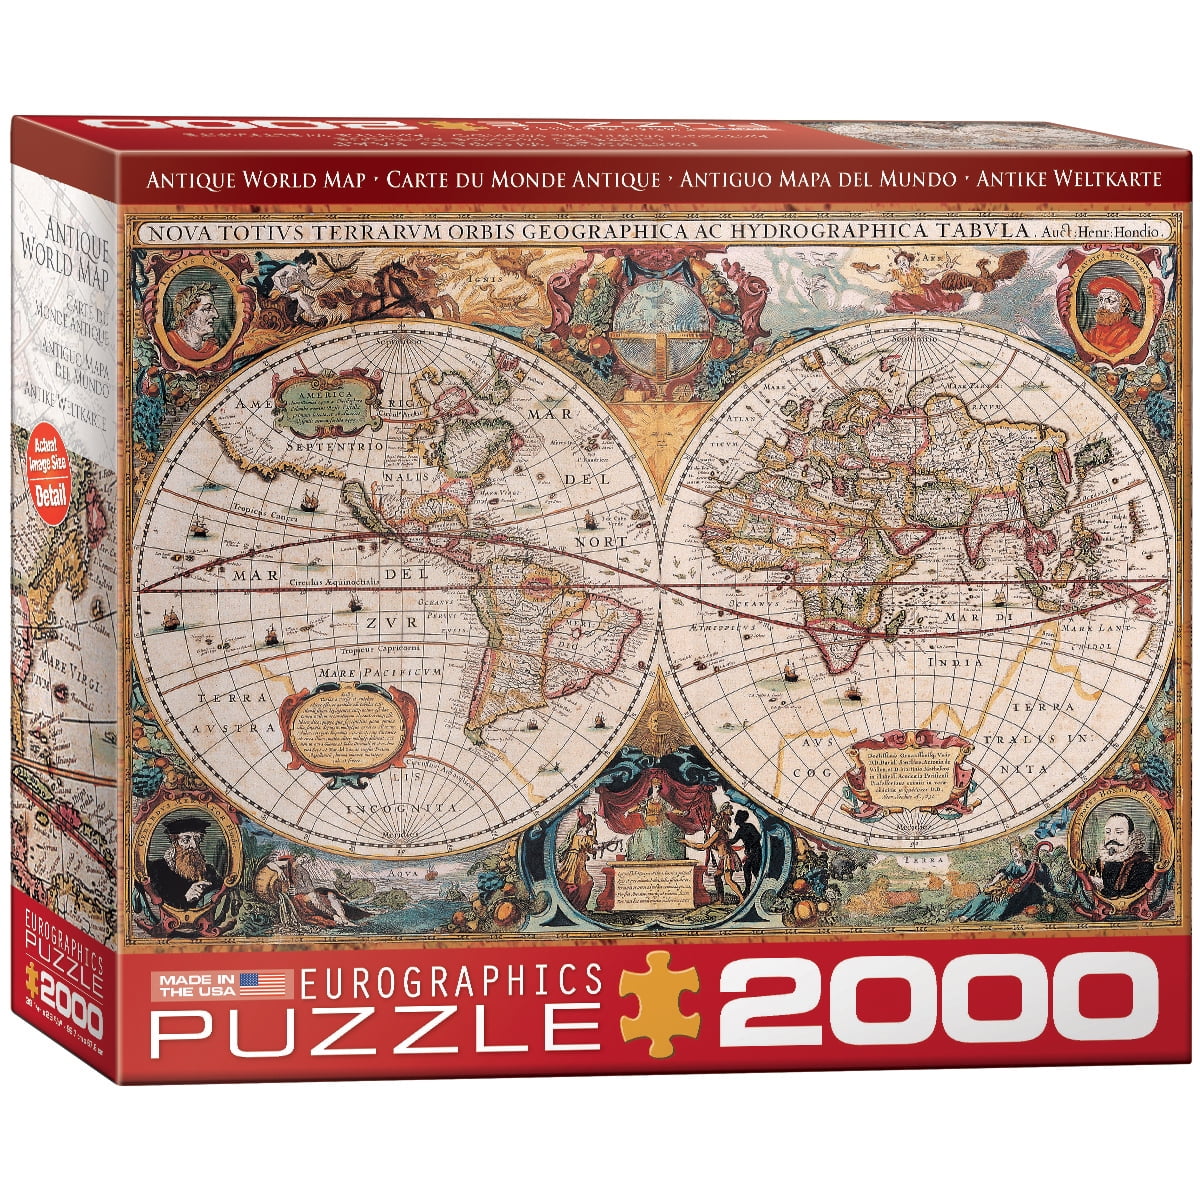 Eurographics Jigsaw Puzzle Antique World Map 2000pc Educational for sale online 